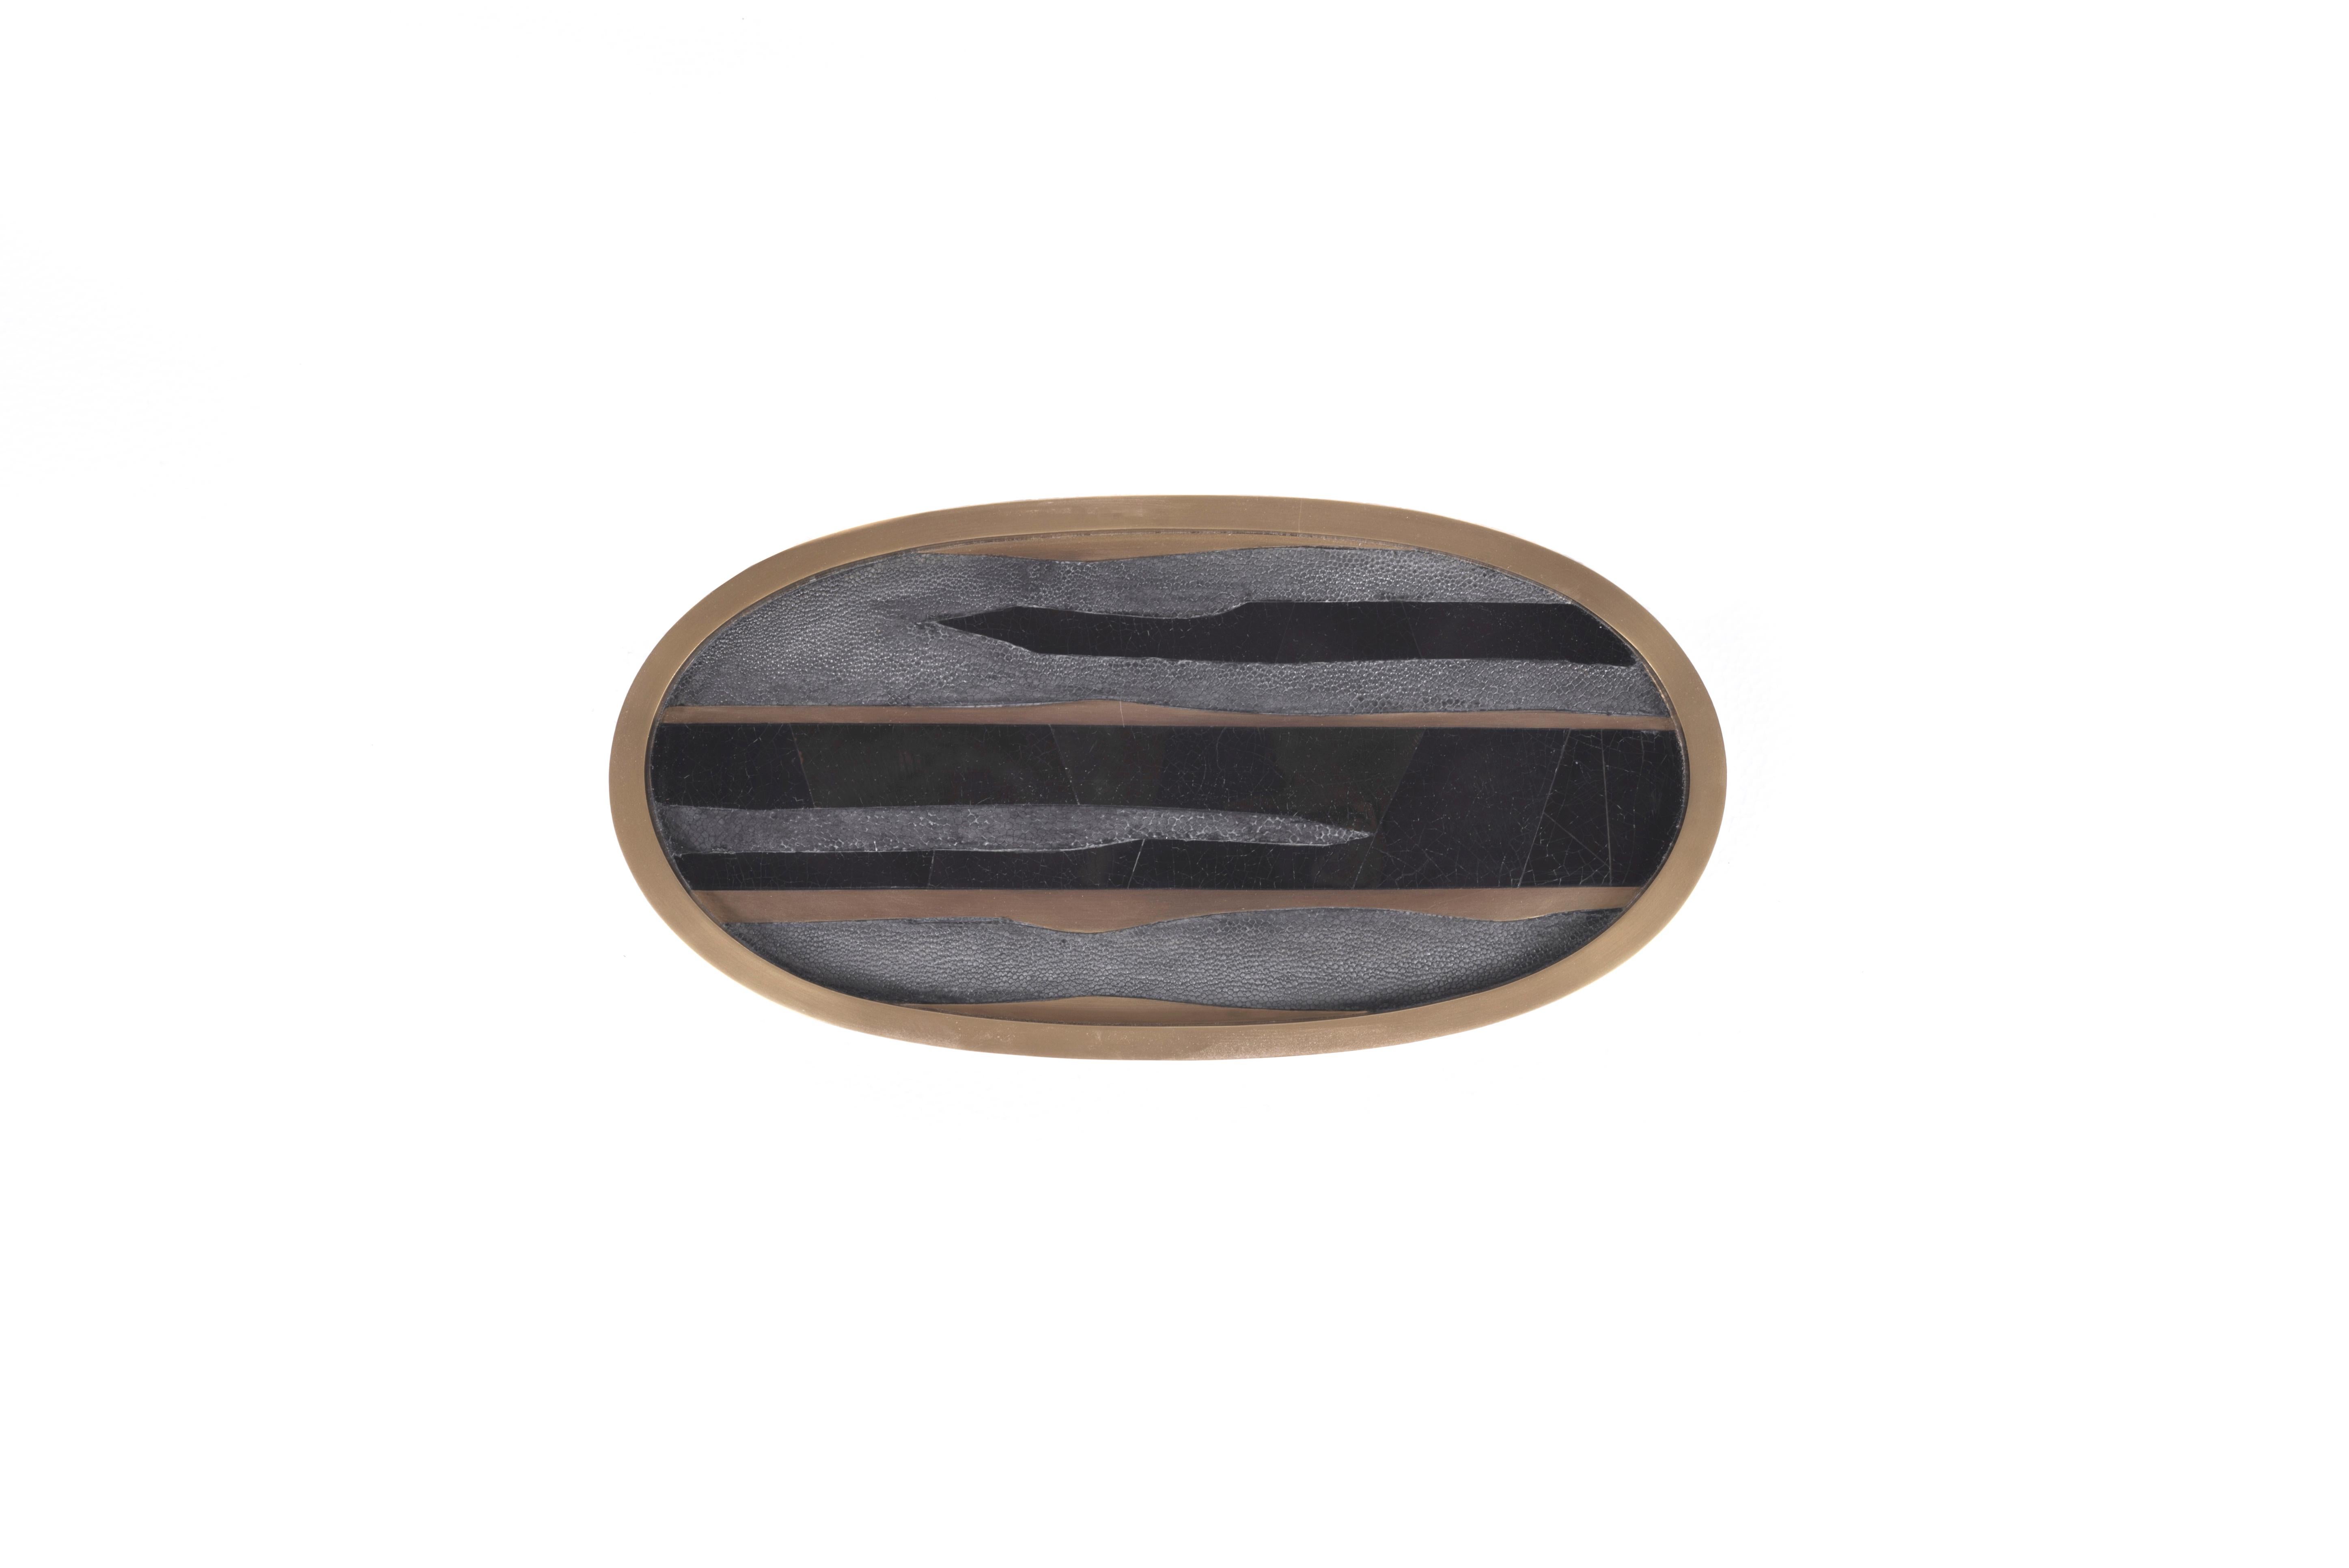 Hand-Crafted Oval Tray inlaid in Blue Shell and Brass by Kifu, Paris